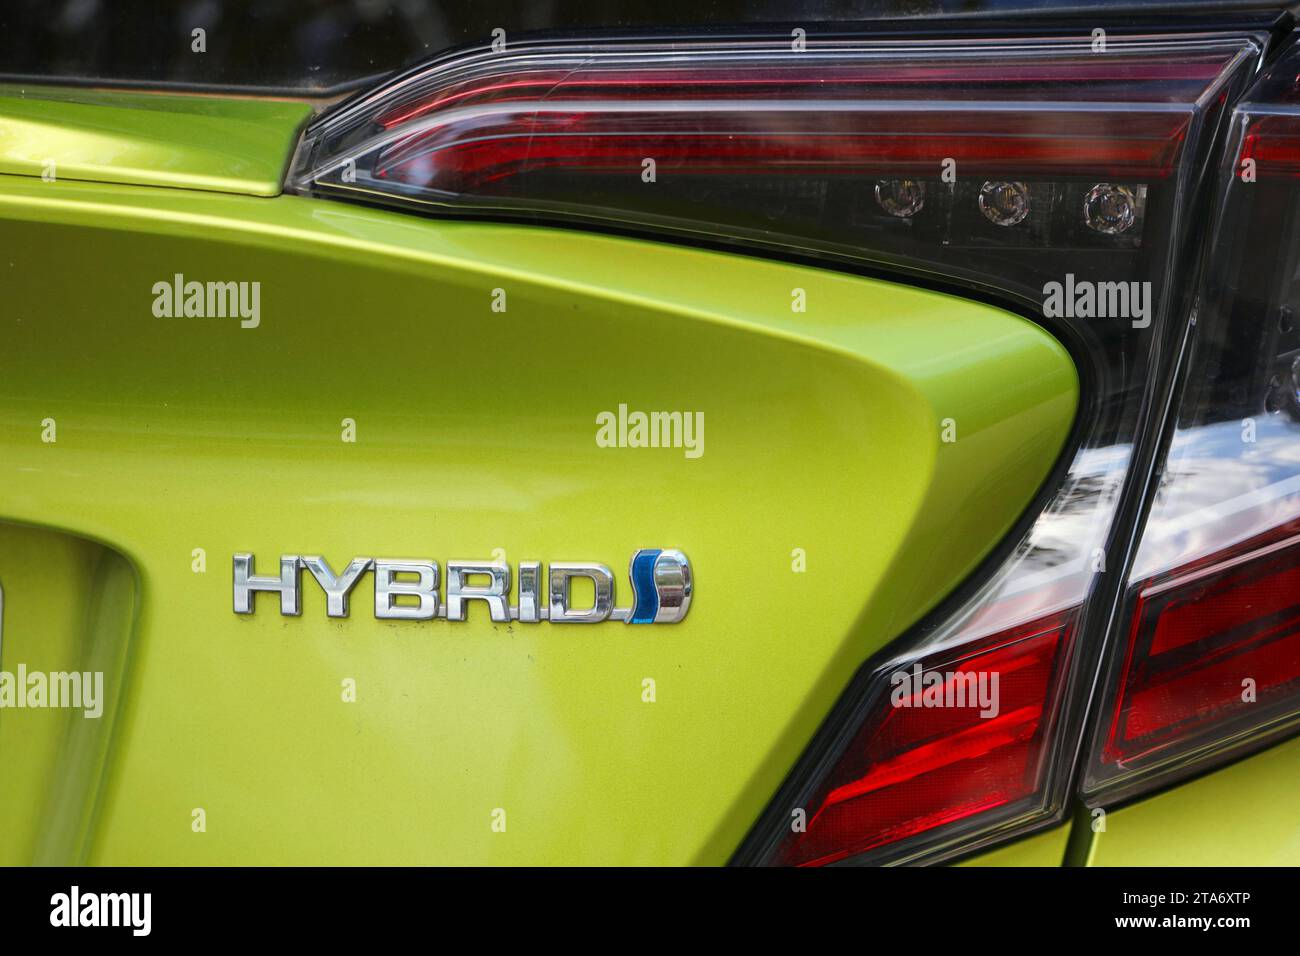 BARCELONA, SPAIN - OCTOBER 7, 2021: Hybrid marking on a Toyota car in Spain. Modern hybrid cars are partially powered by electricity. Stock Photo